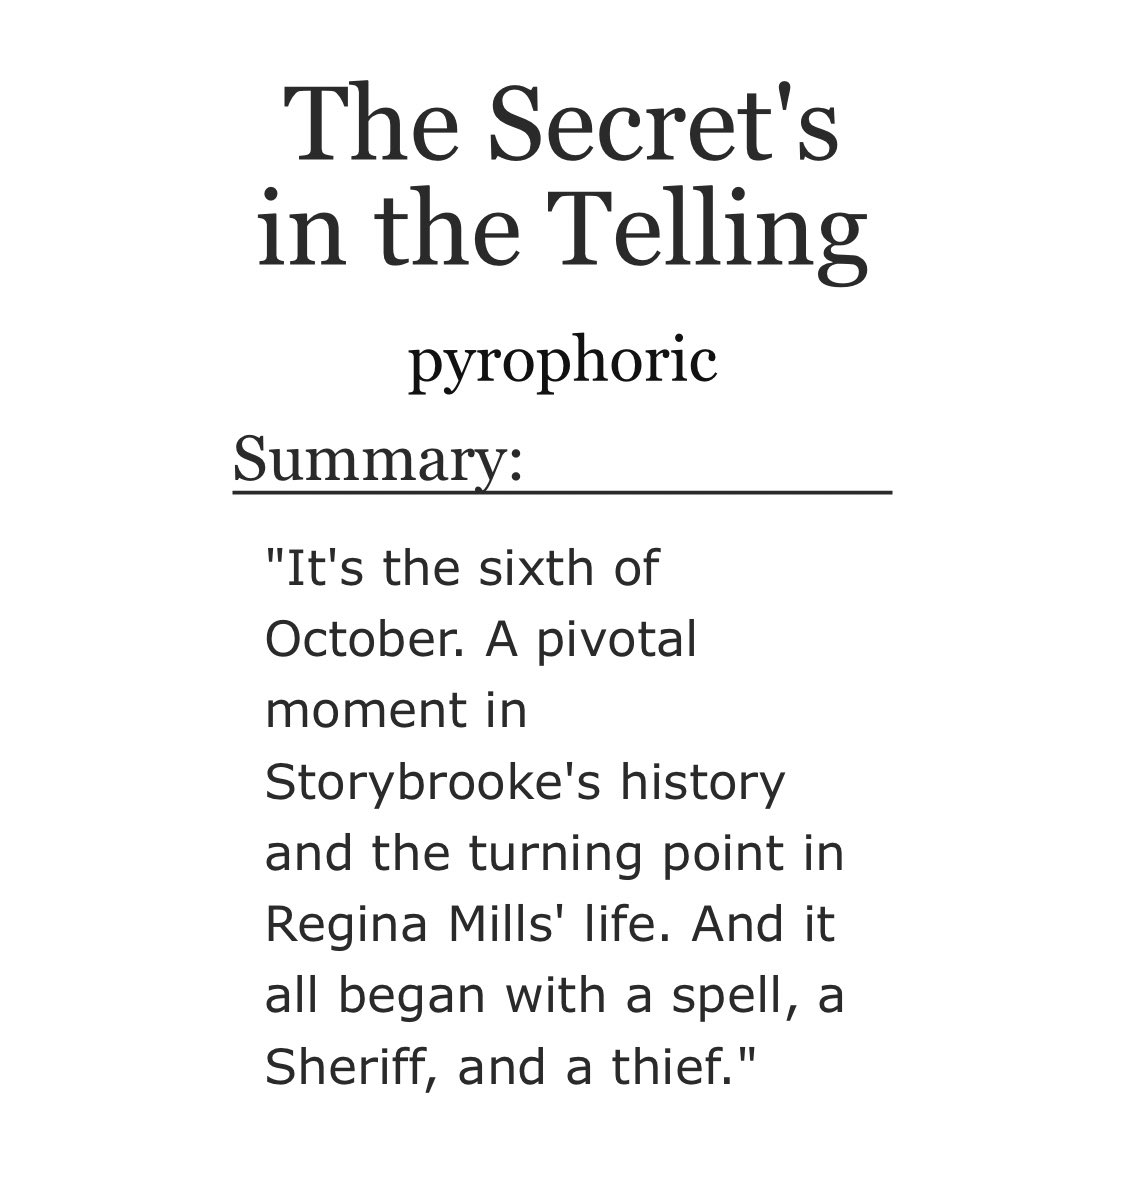 January 27: The Secret’s in the Telling by pyrophoric  https://archiveofourown.org/works/583622/chapters/1048316